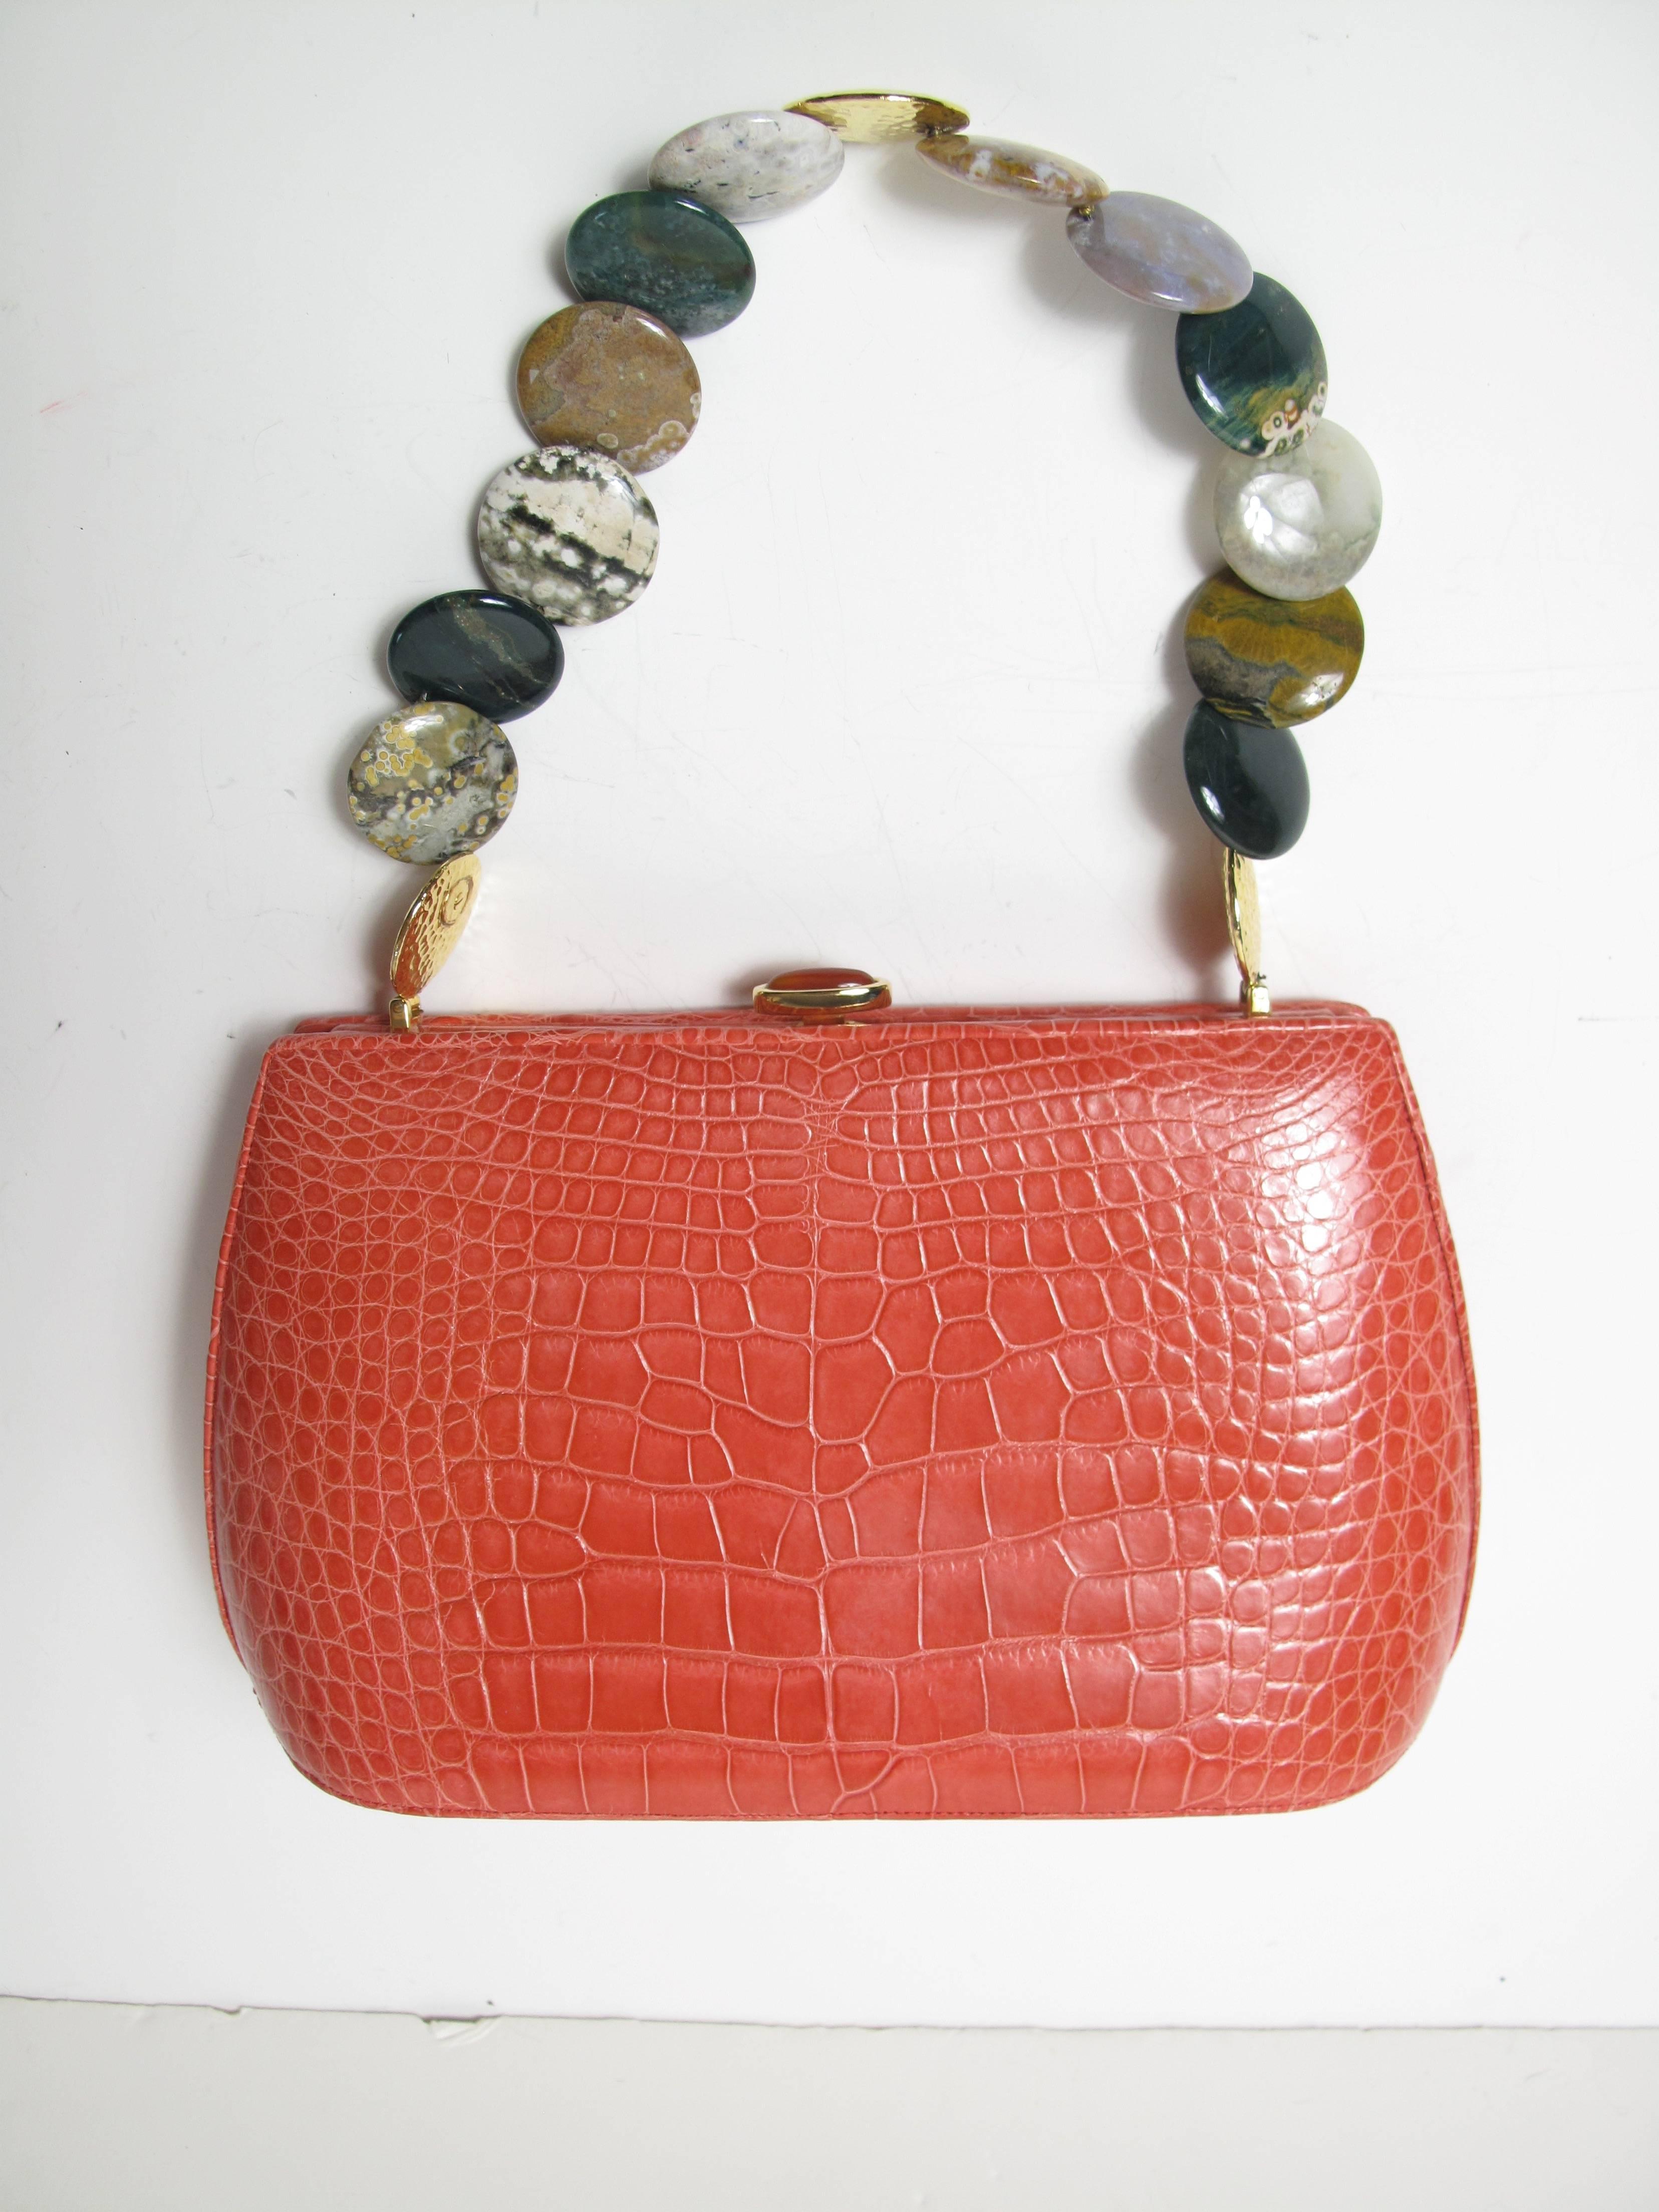 Judith Leiber alligator bag with polished stone strap.  Condition: Excellent, very little wear to bottom.   

We accept returns for refund, please see our terms.    Please let us know if you have any questions.